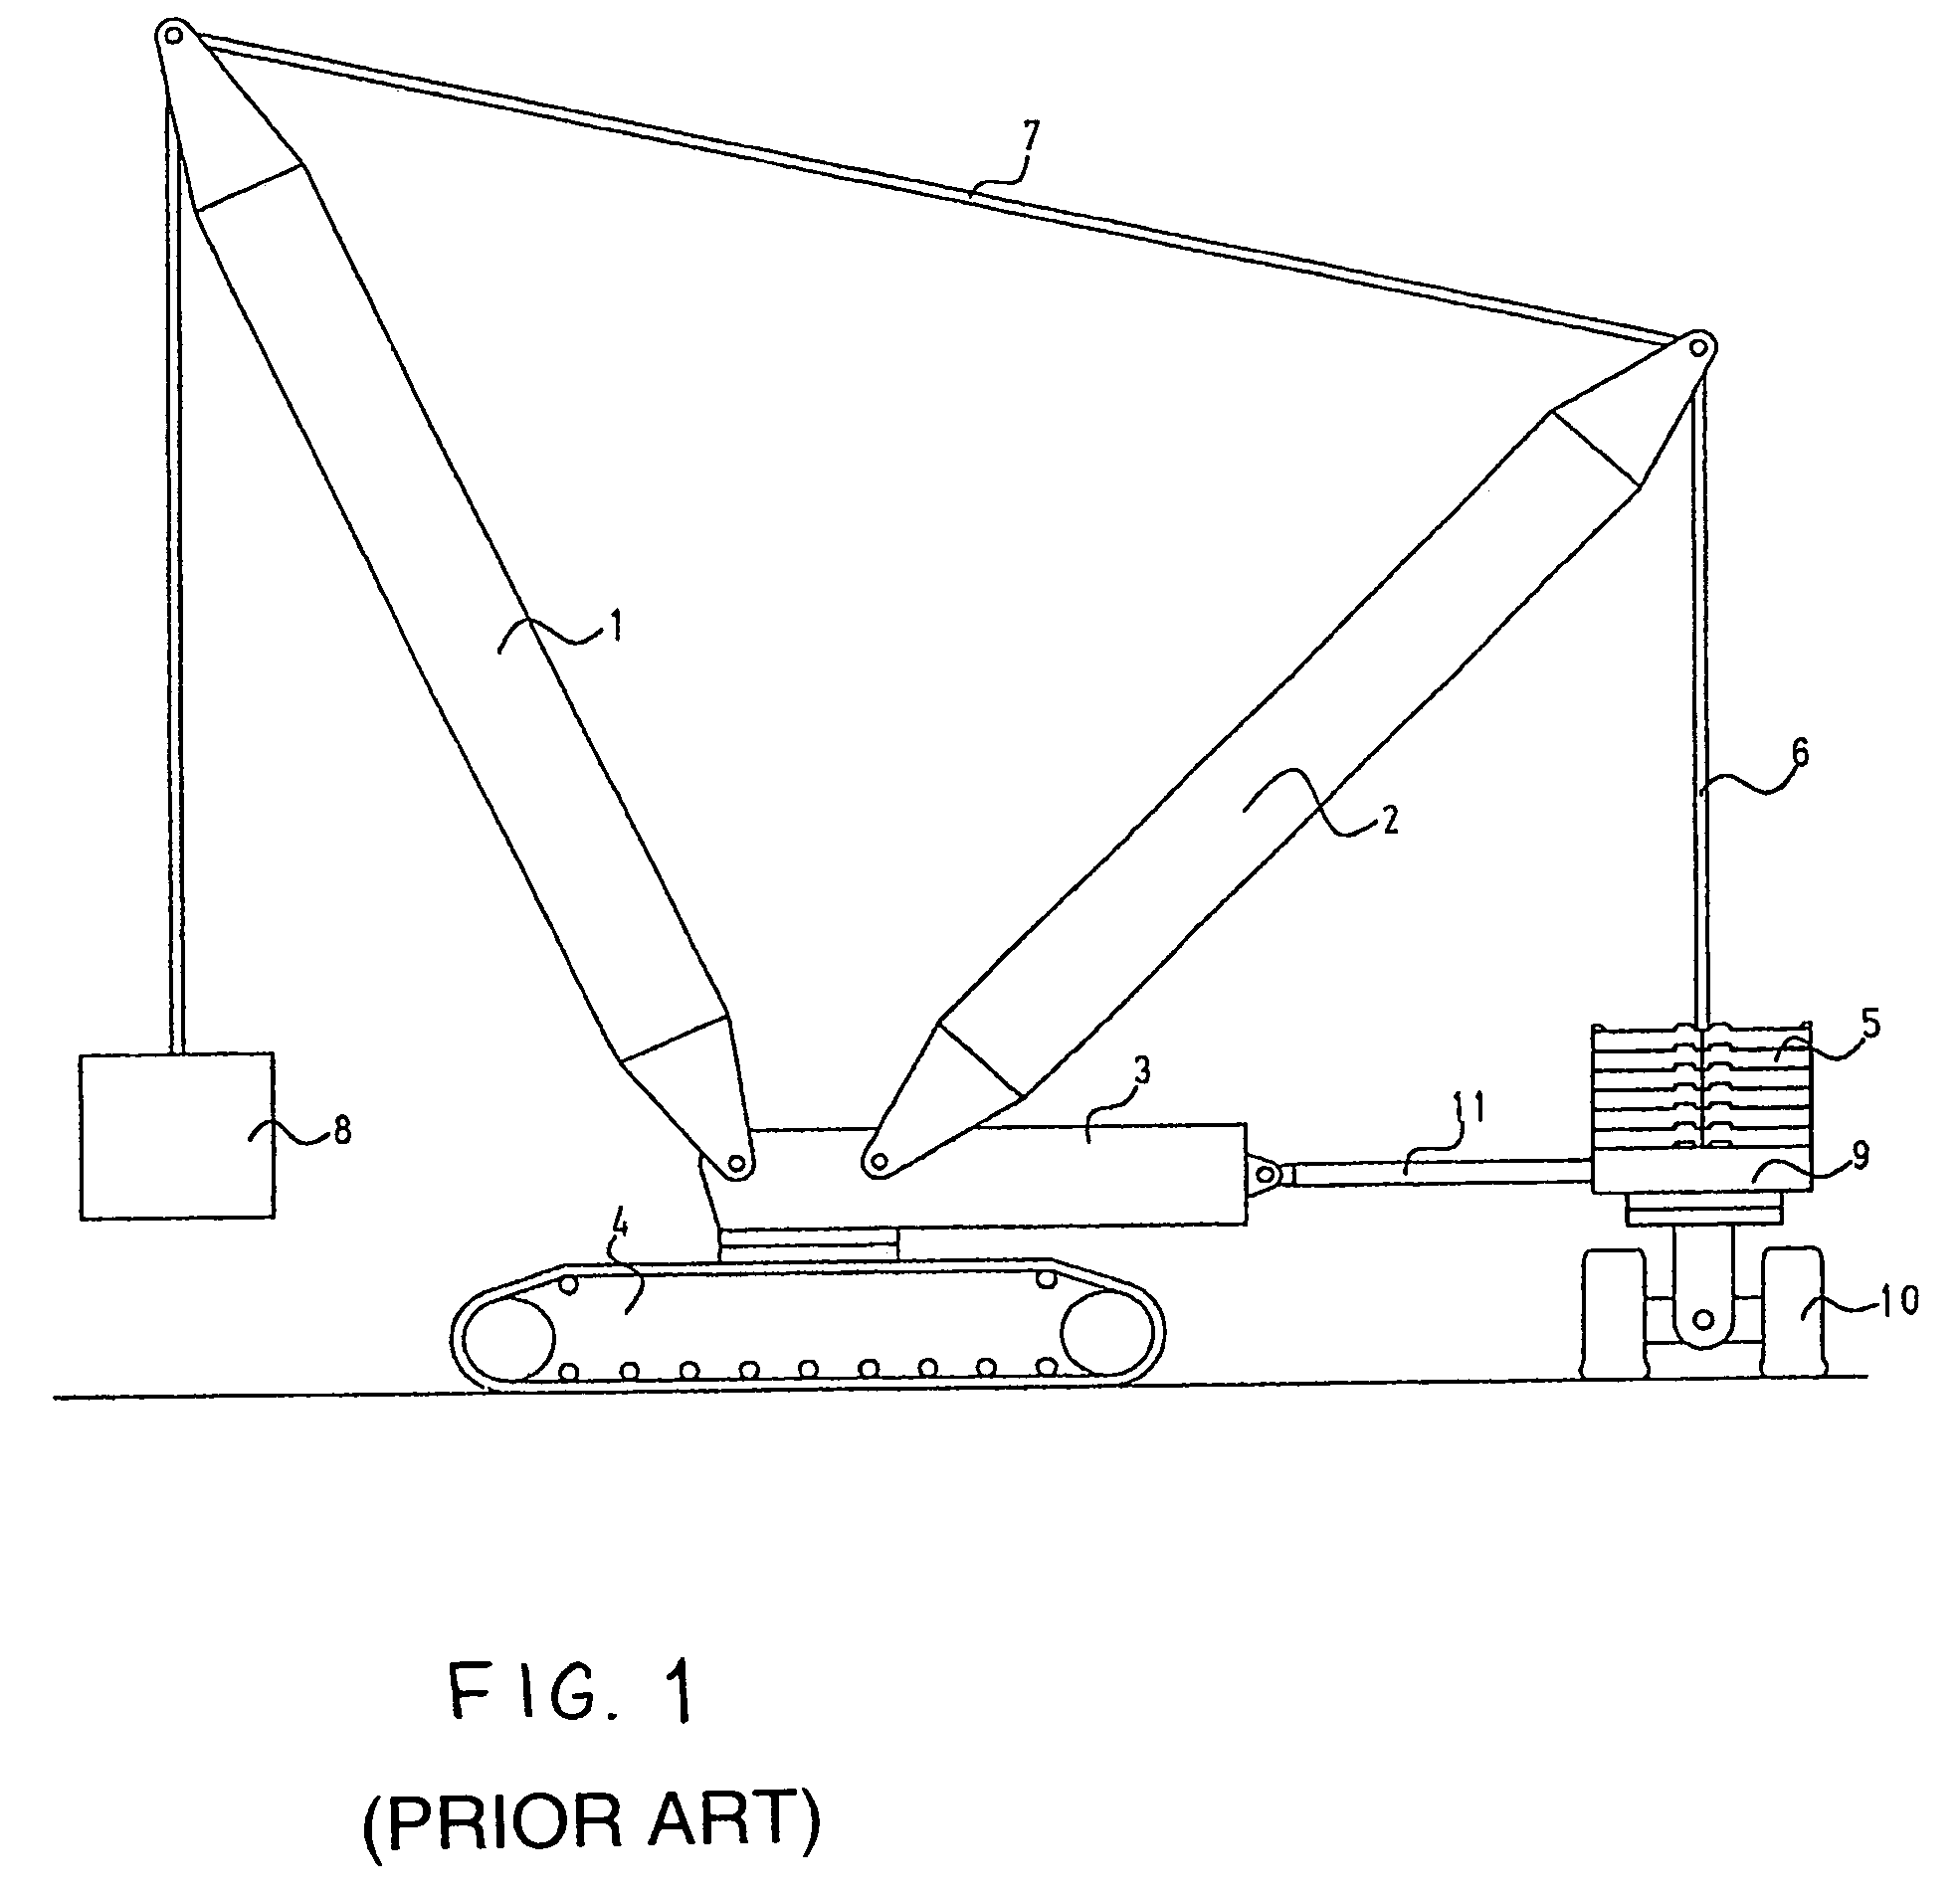 Modular counterweight carriage for cranes, in particular for large crane